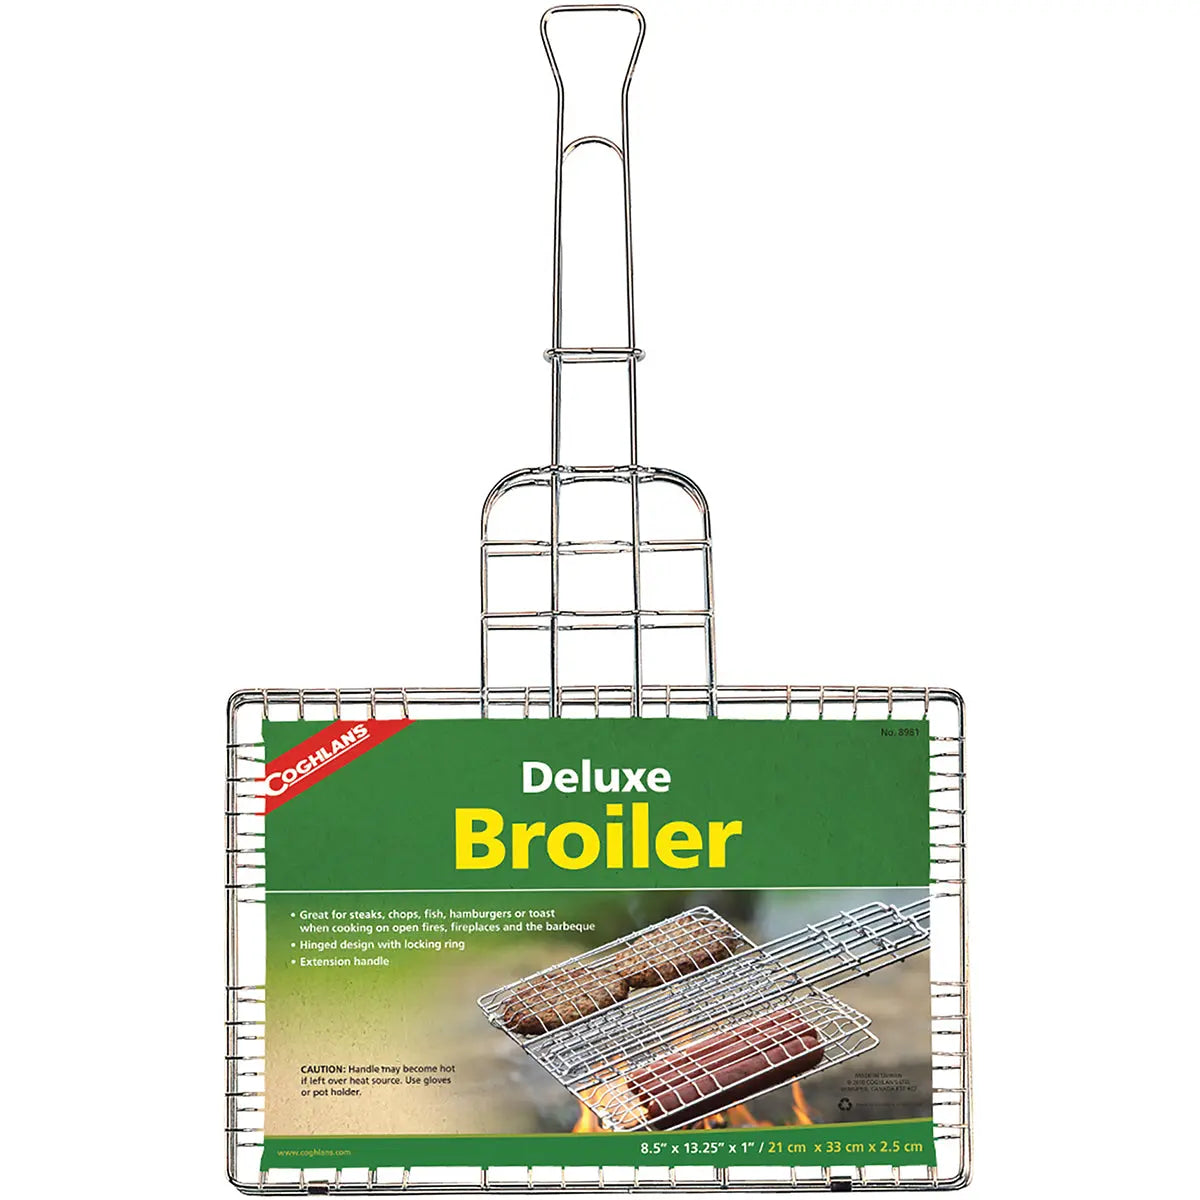 Coghlan's Deluxe Broiler, Cook Over Open Fire, Camping Fireplaces, and Barbeque Coghlan's